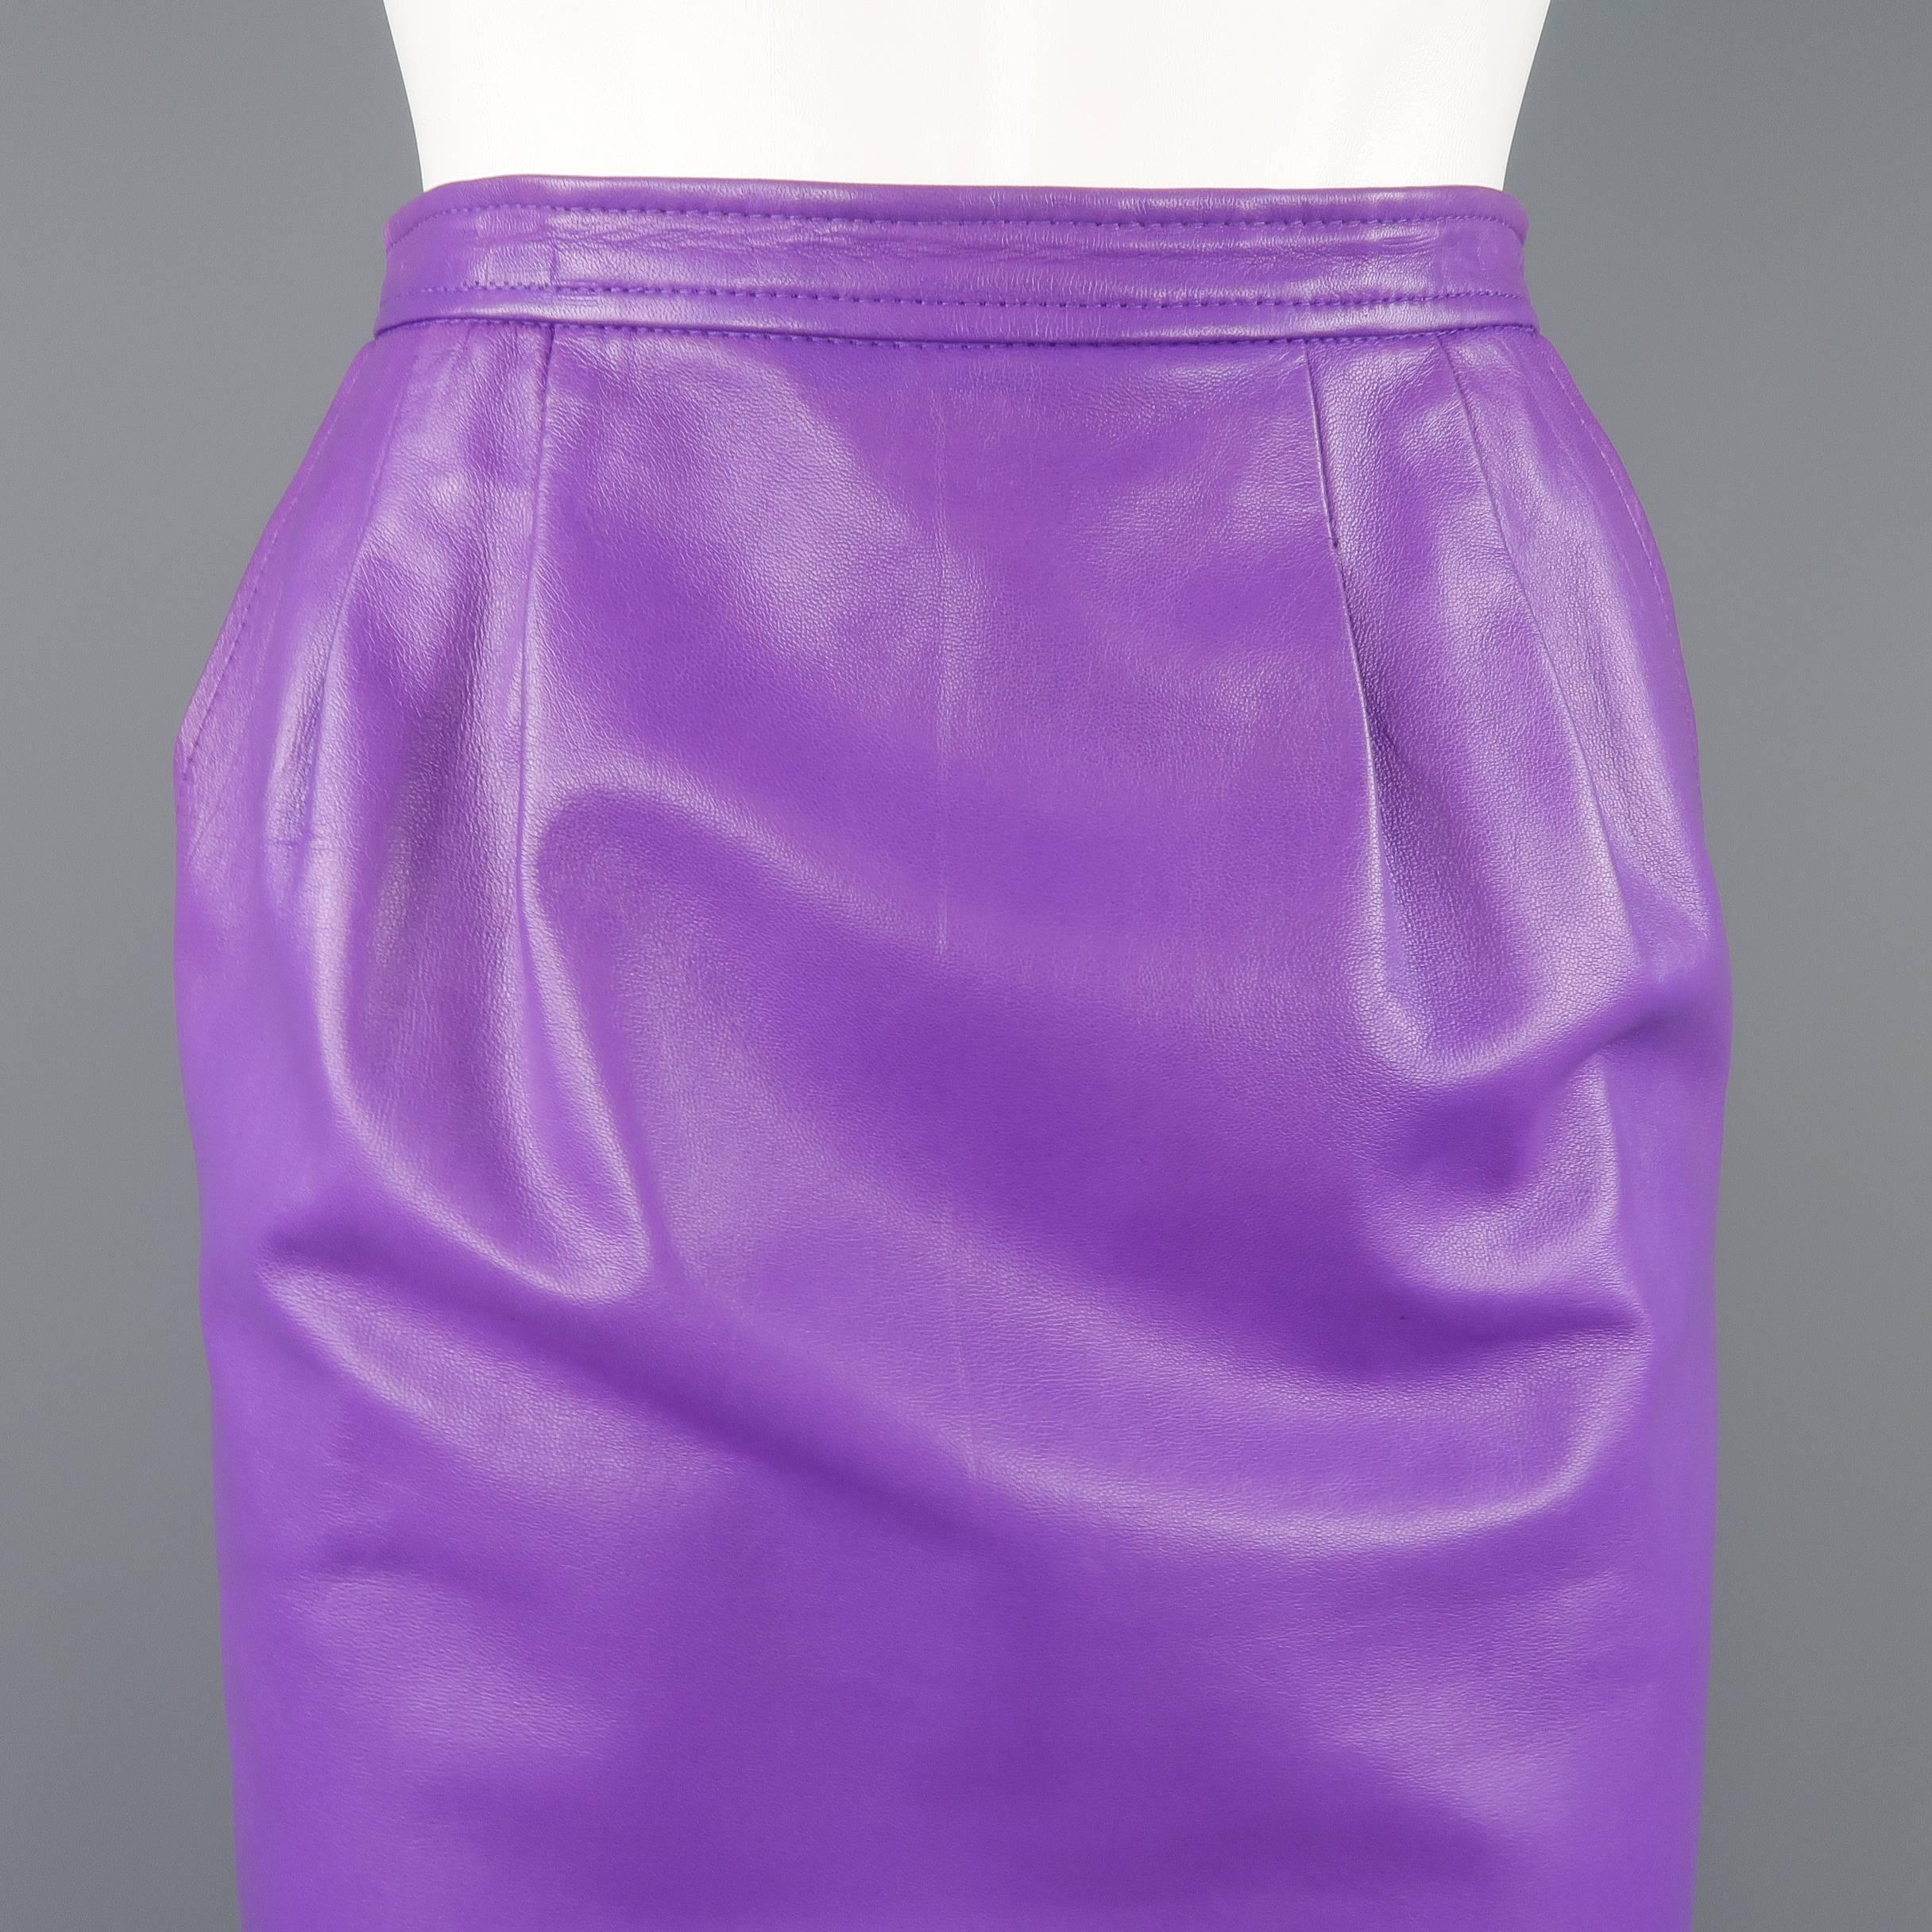 Vintage 1980's YVES SAINT LAURENT RIVE GAUCHE pencil skirt comes in vibrant purple soft leather with a high rise, slanted pockets, pleated waist, and satin liner. Faint discoloration throughout. As-is. Made in France.
 
Good Pre-Owned